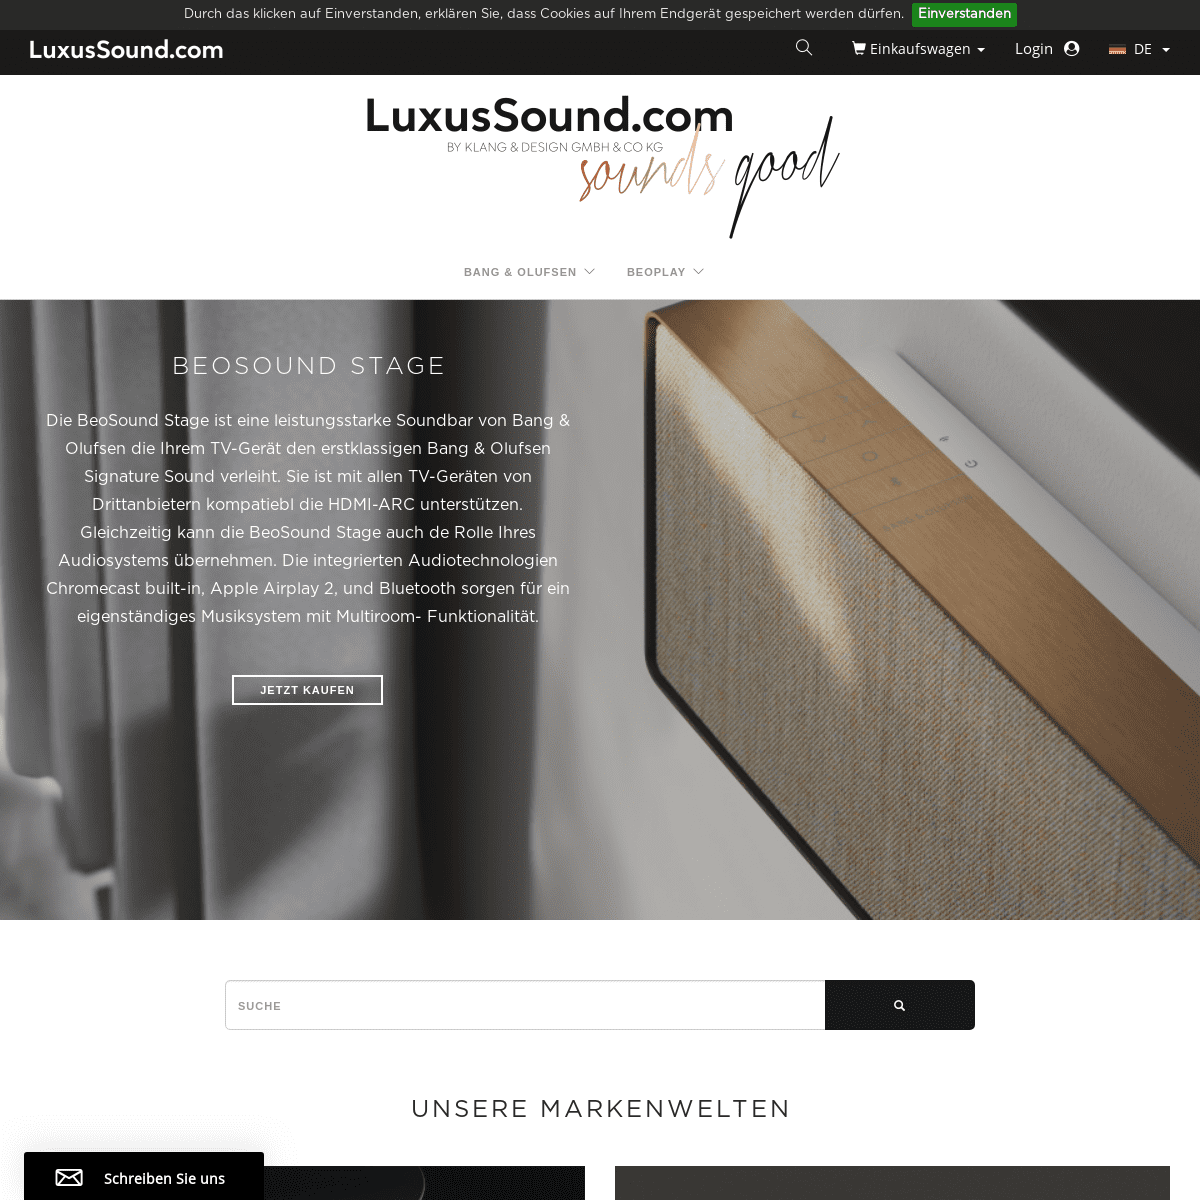 A complete backup of luxussound.com